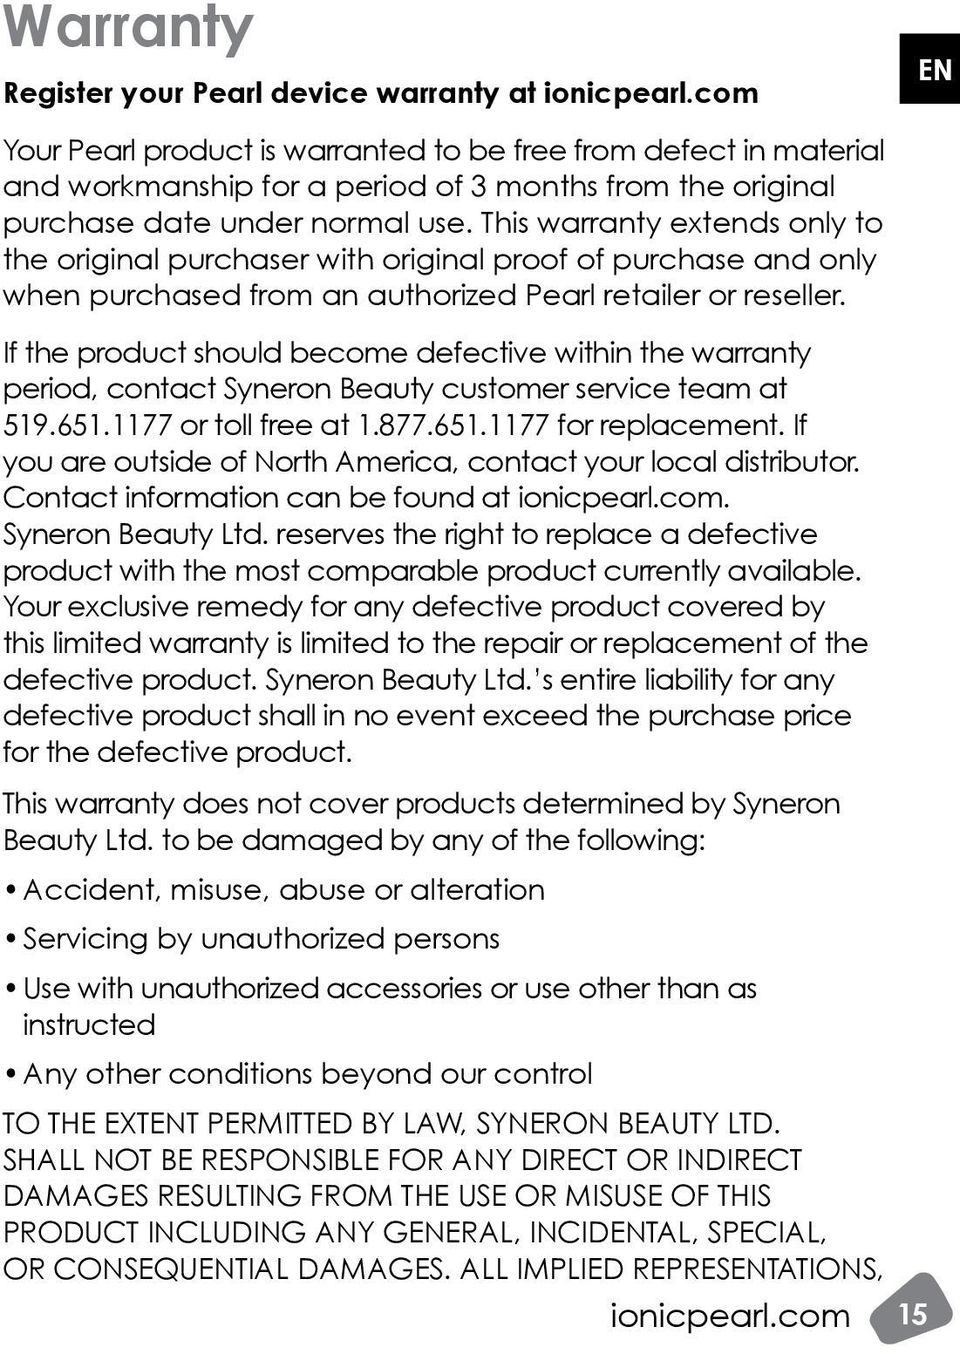 If the product should become defective within the warranty period, contact Syneron Beauty customer service team at 519.651.1177 or toll free at 1.877.651.1177 for replacement.